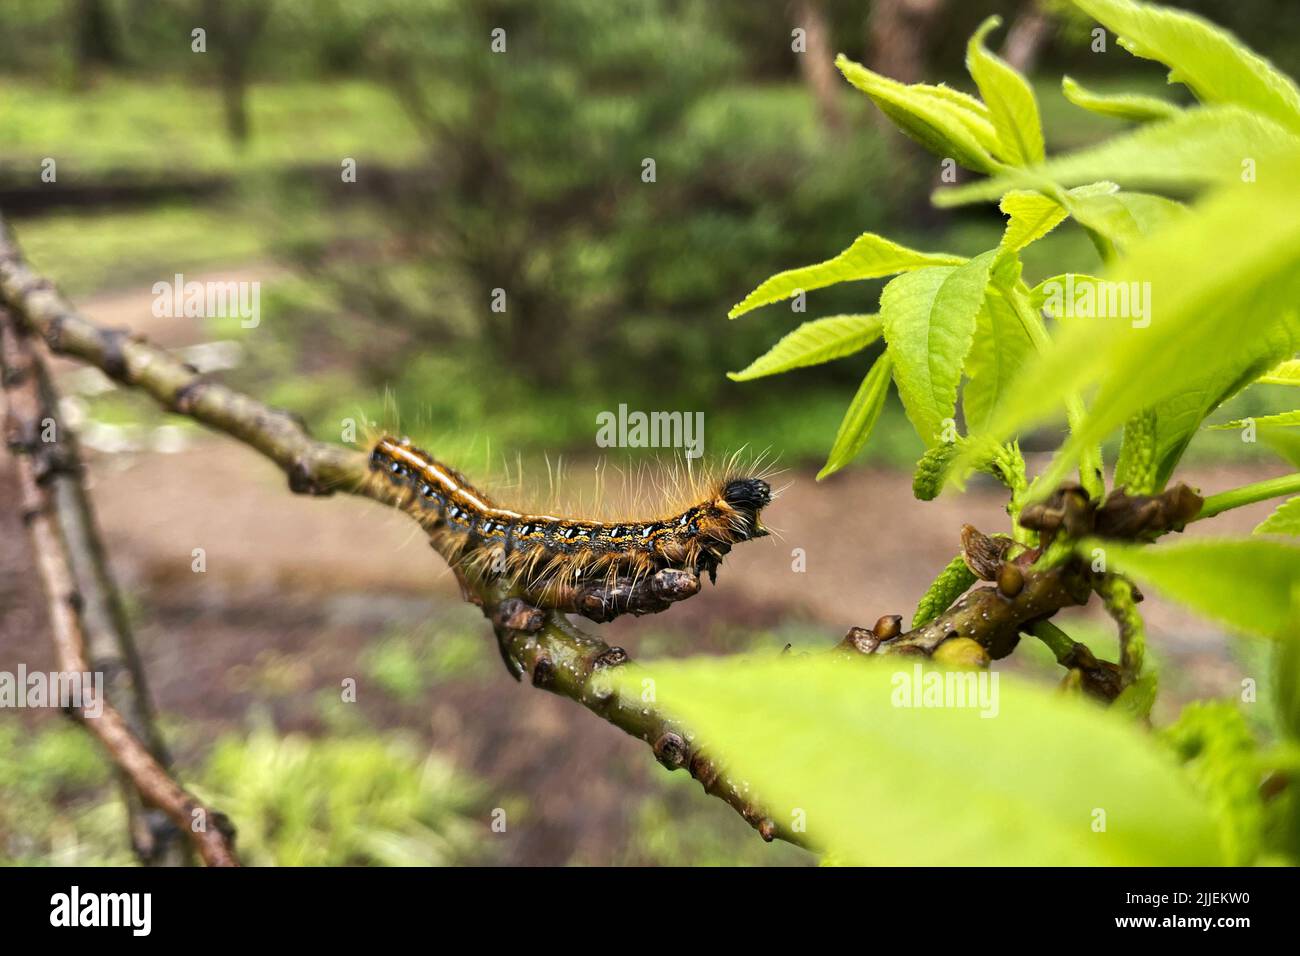 Tent caterpillar ready to munch on a tasty leaf Stock Photo